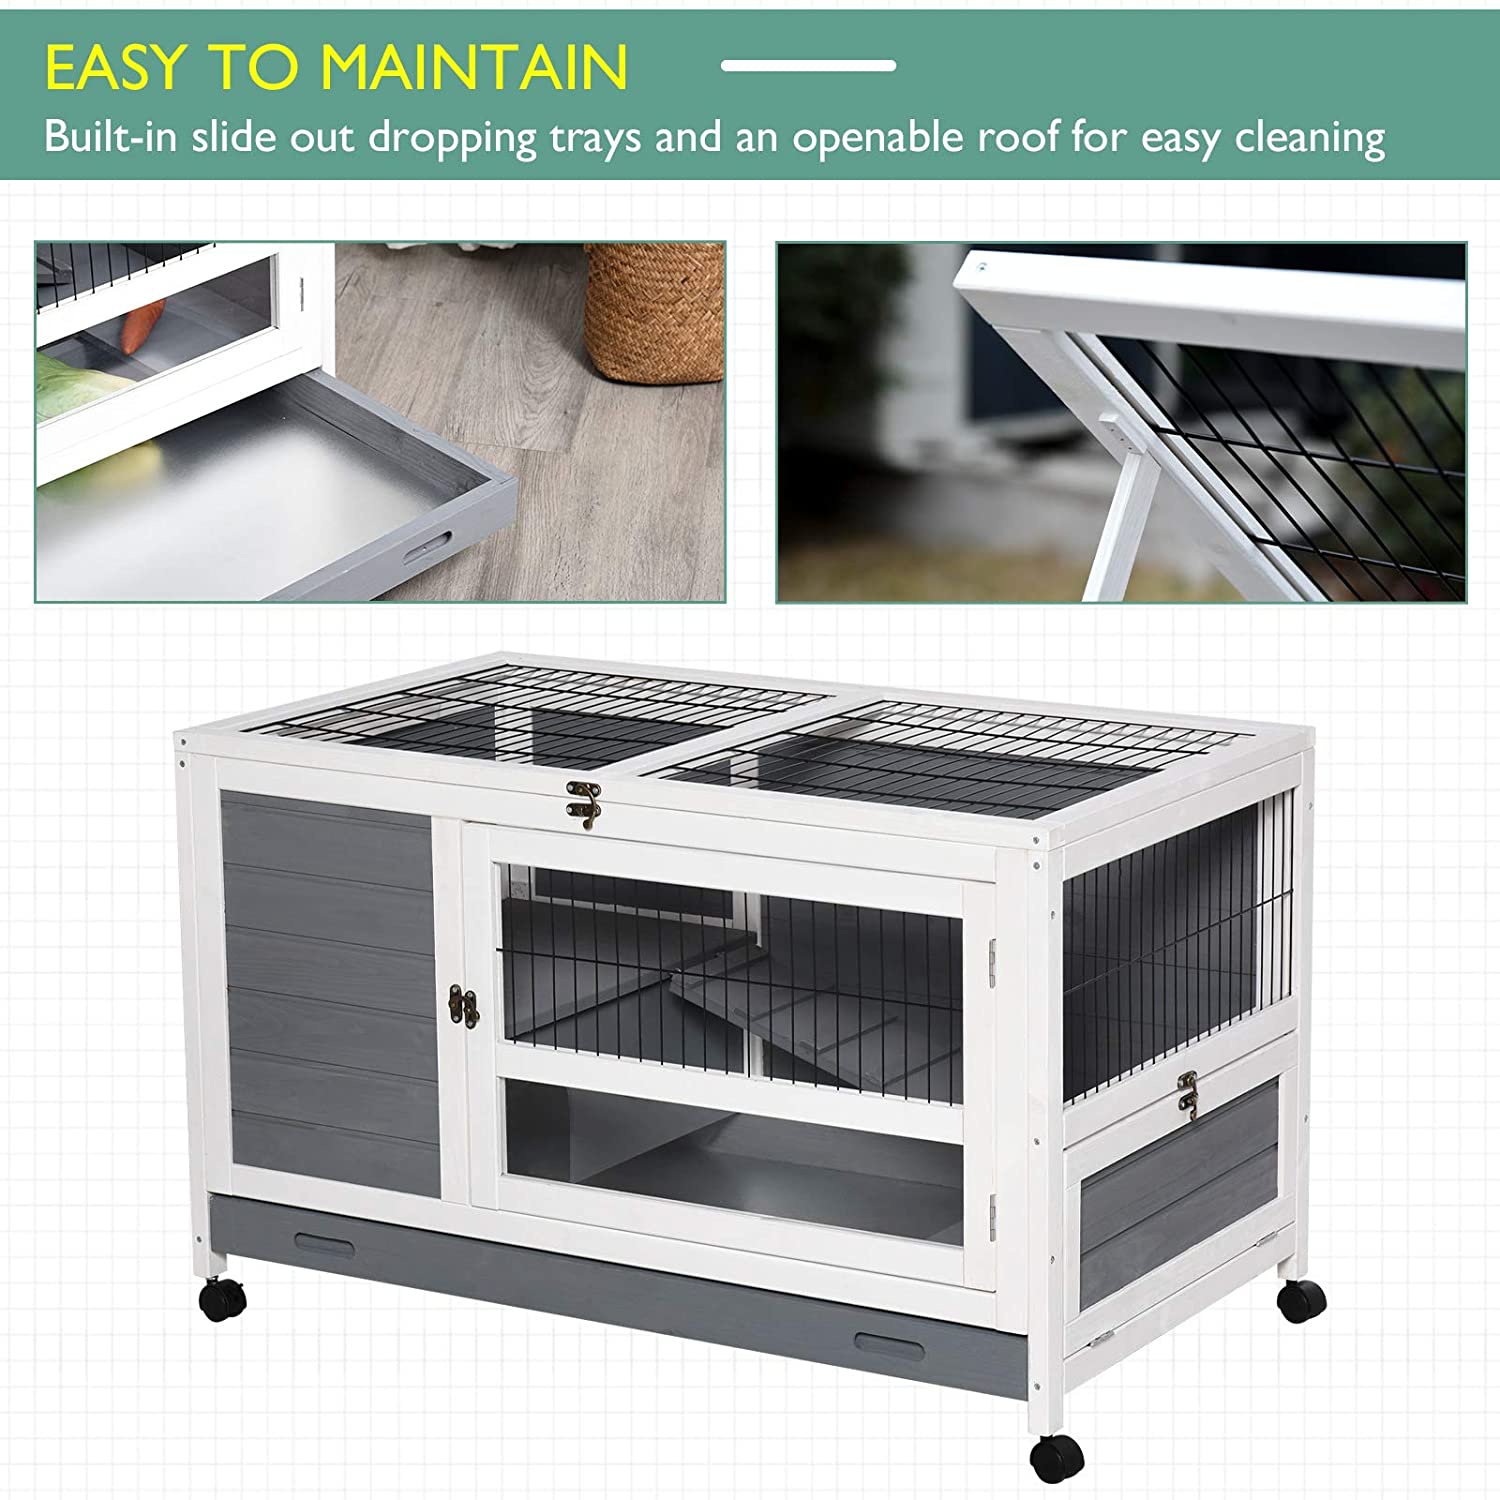 Pawhut Wooden Rabbit Hutch Bunny House Elevated Pet Cage Small Animal Guinea Pig Habitat with Slide-Out Tray Lockable Door Openable Top for Indoor 40" X 23.5" X 25" Grey